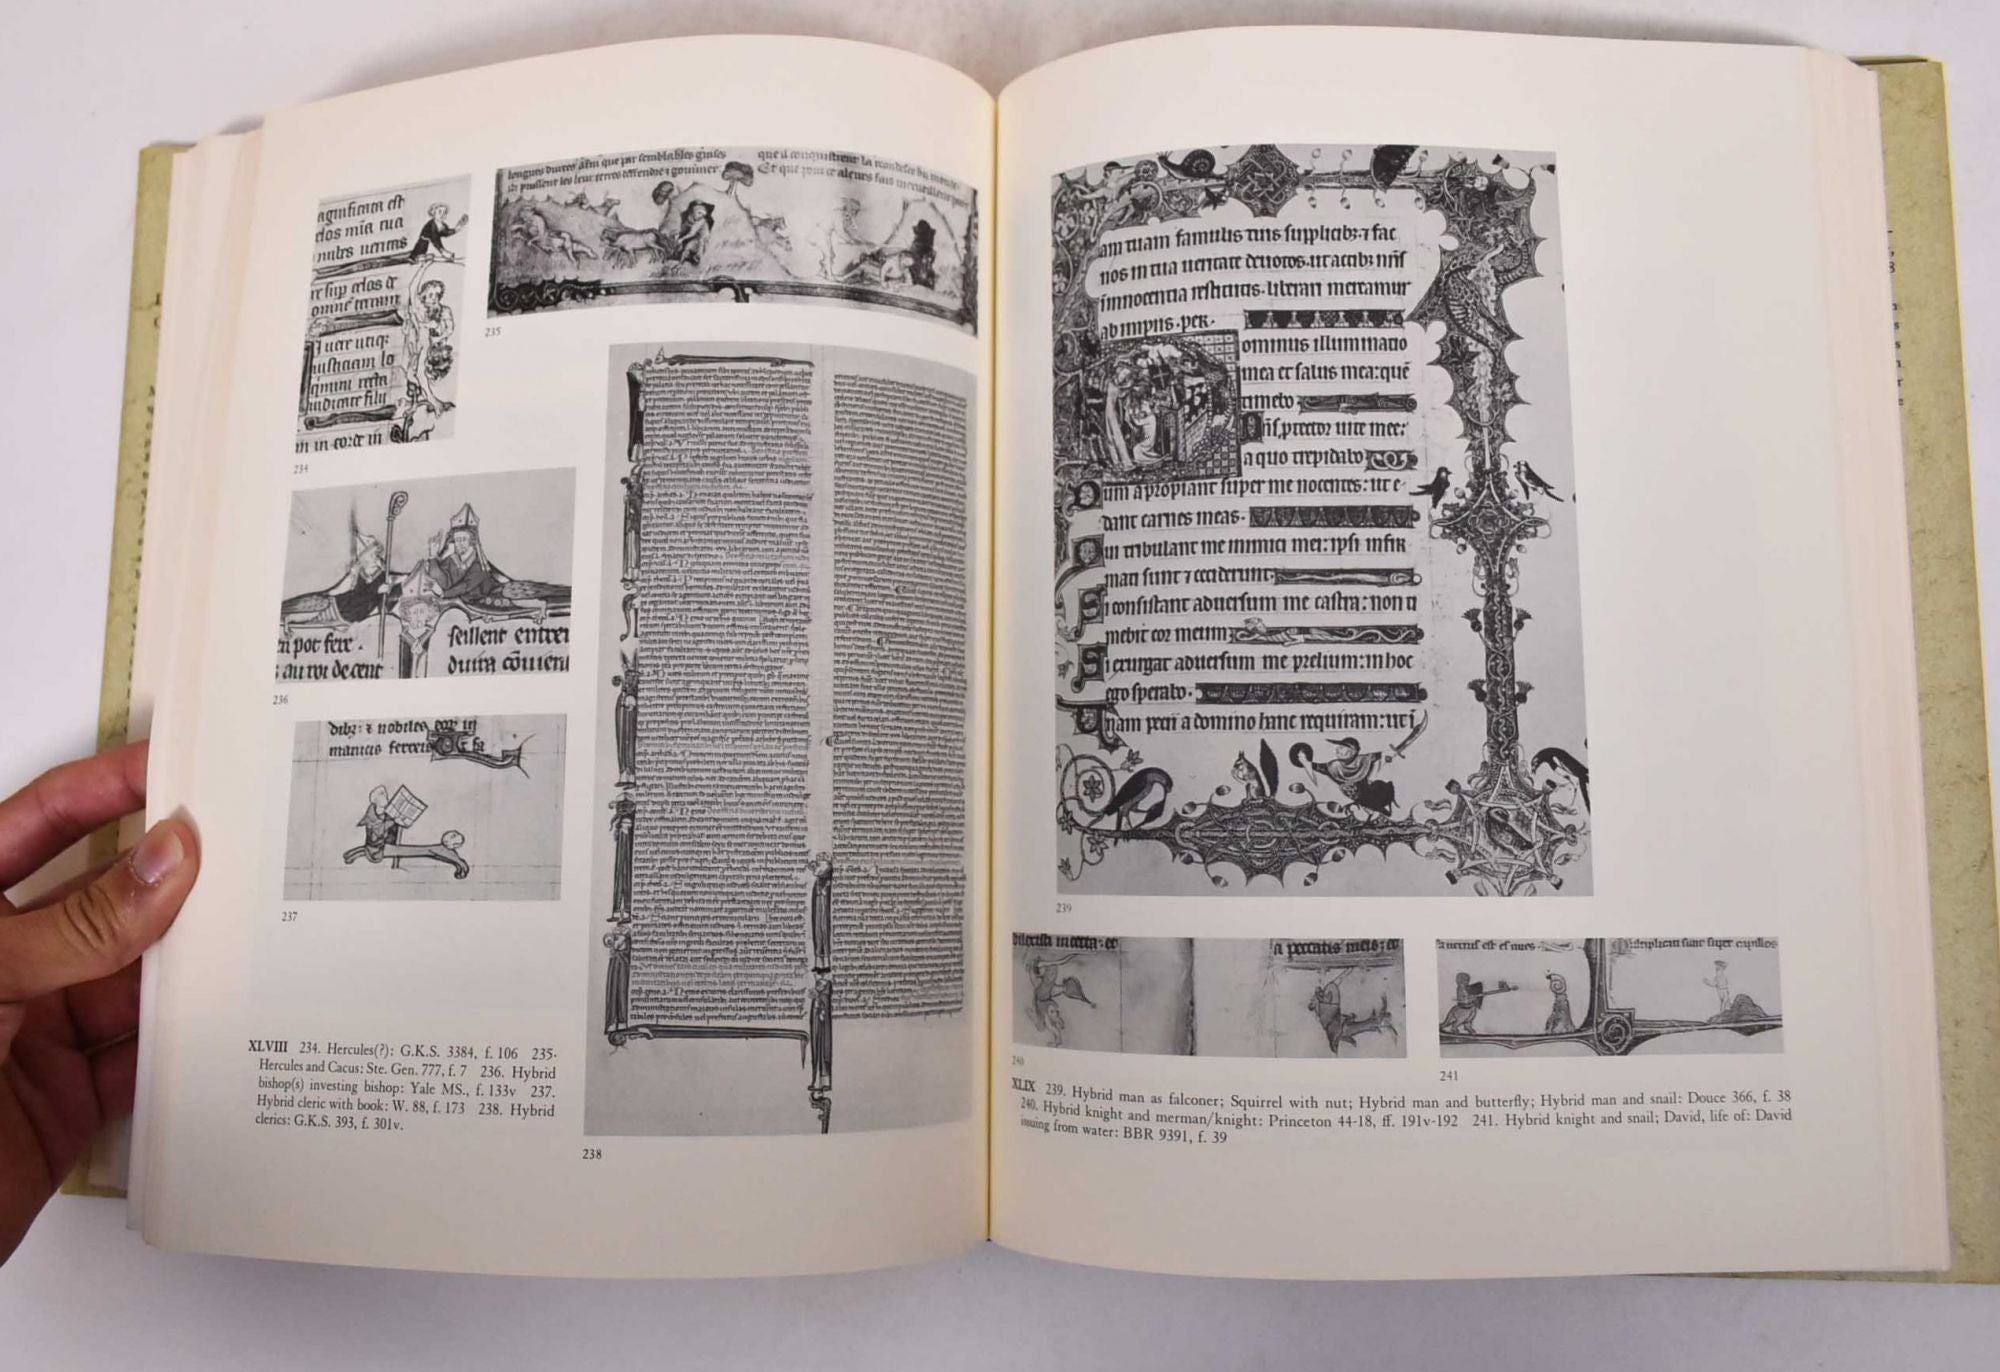 Images in the Margins of Gothic Manuscripts by Lilian M. C Randall on  Mullen Books